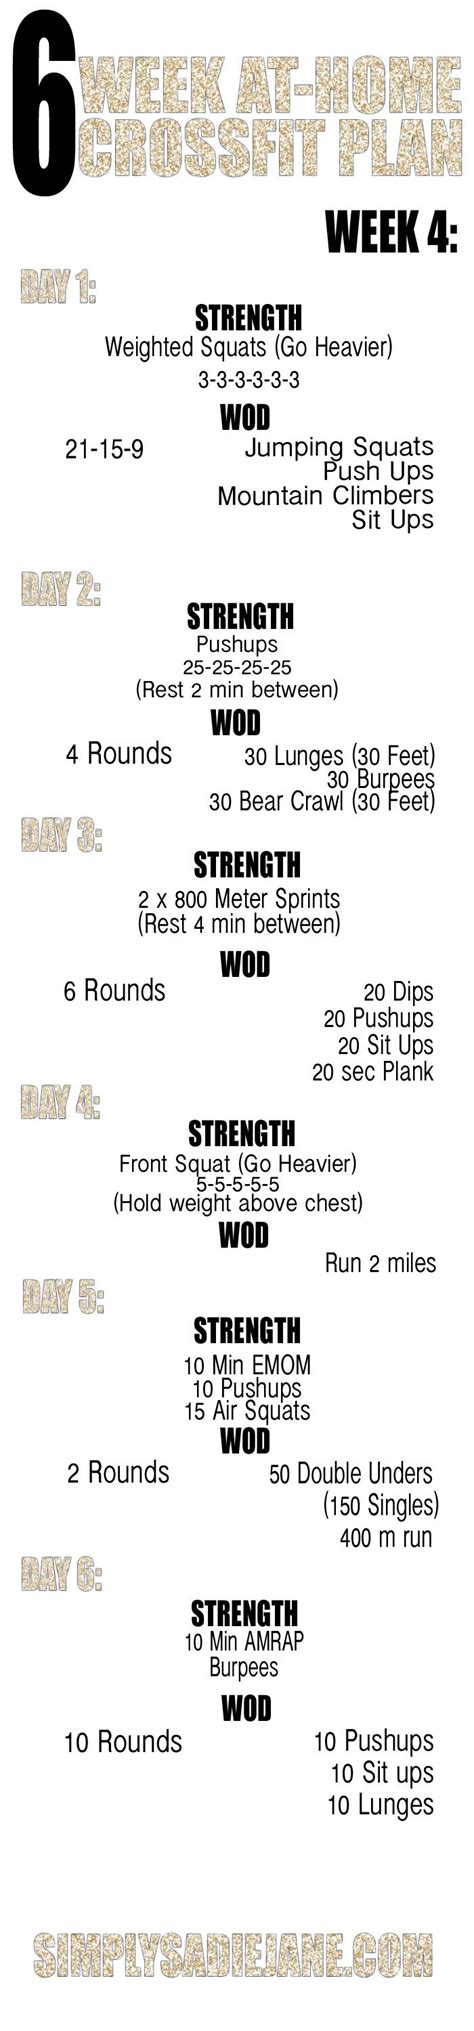 The Six Week Workout Plan Is Shown In Black And White With Text On It